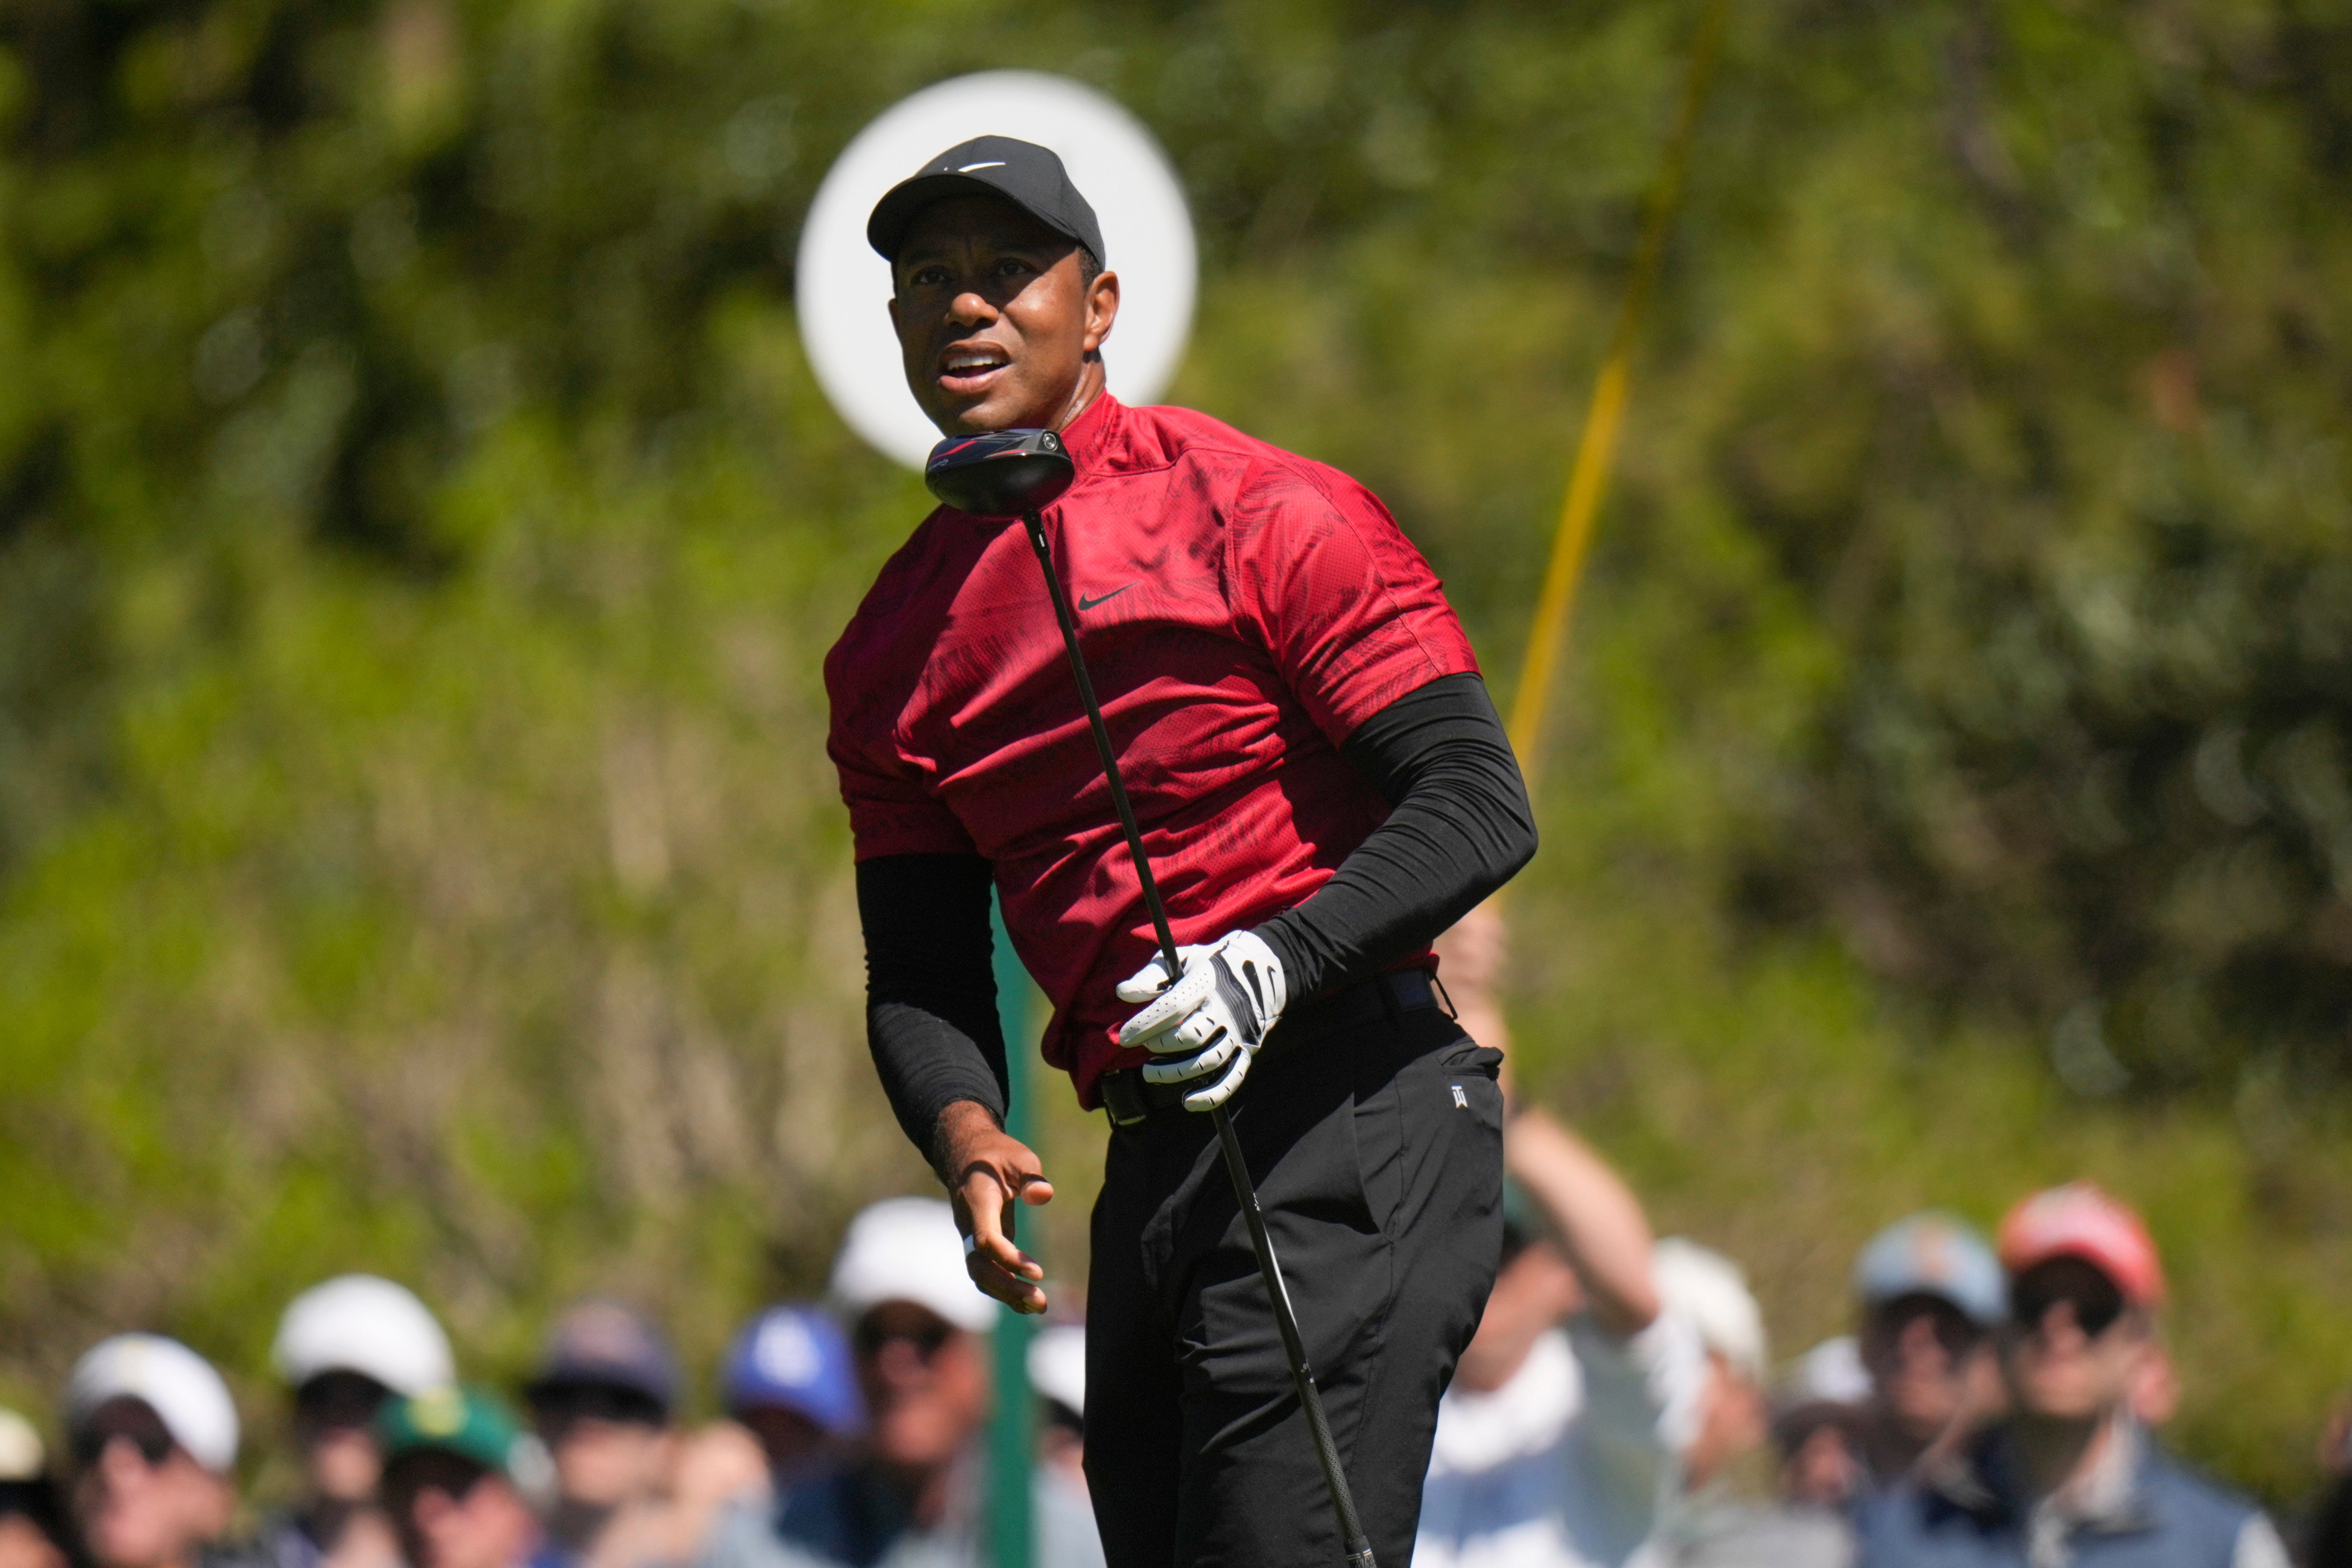 Tiger Woods is confident ahead of the PGA Championship